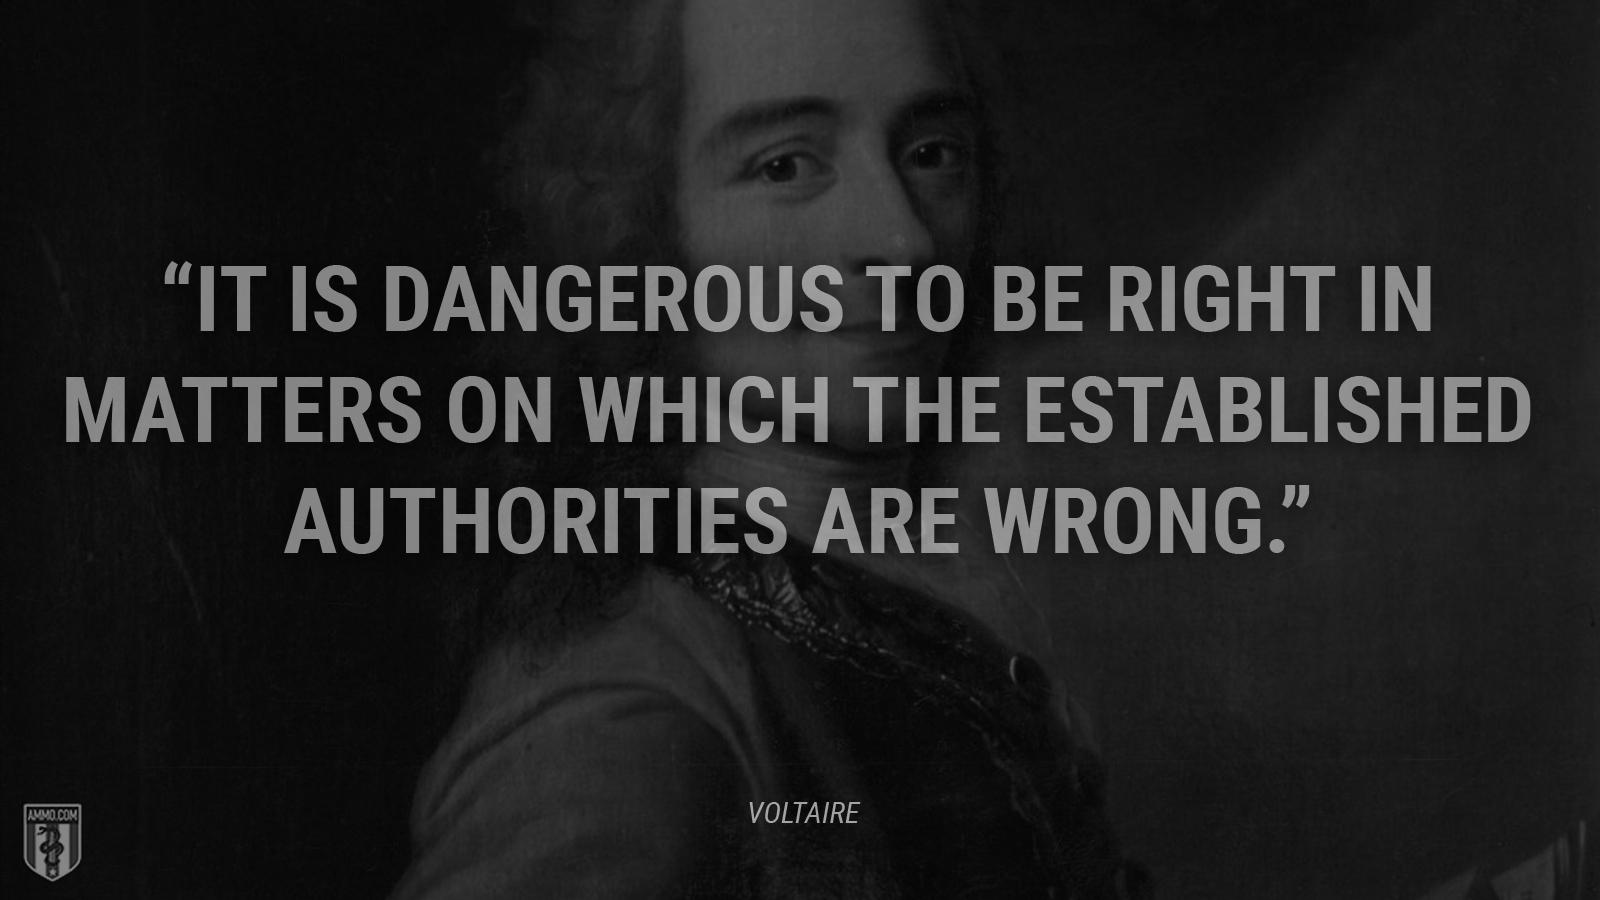 “It is dangerous to be right in matters on which the established authorities are wrong.” - Voltaire